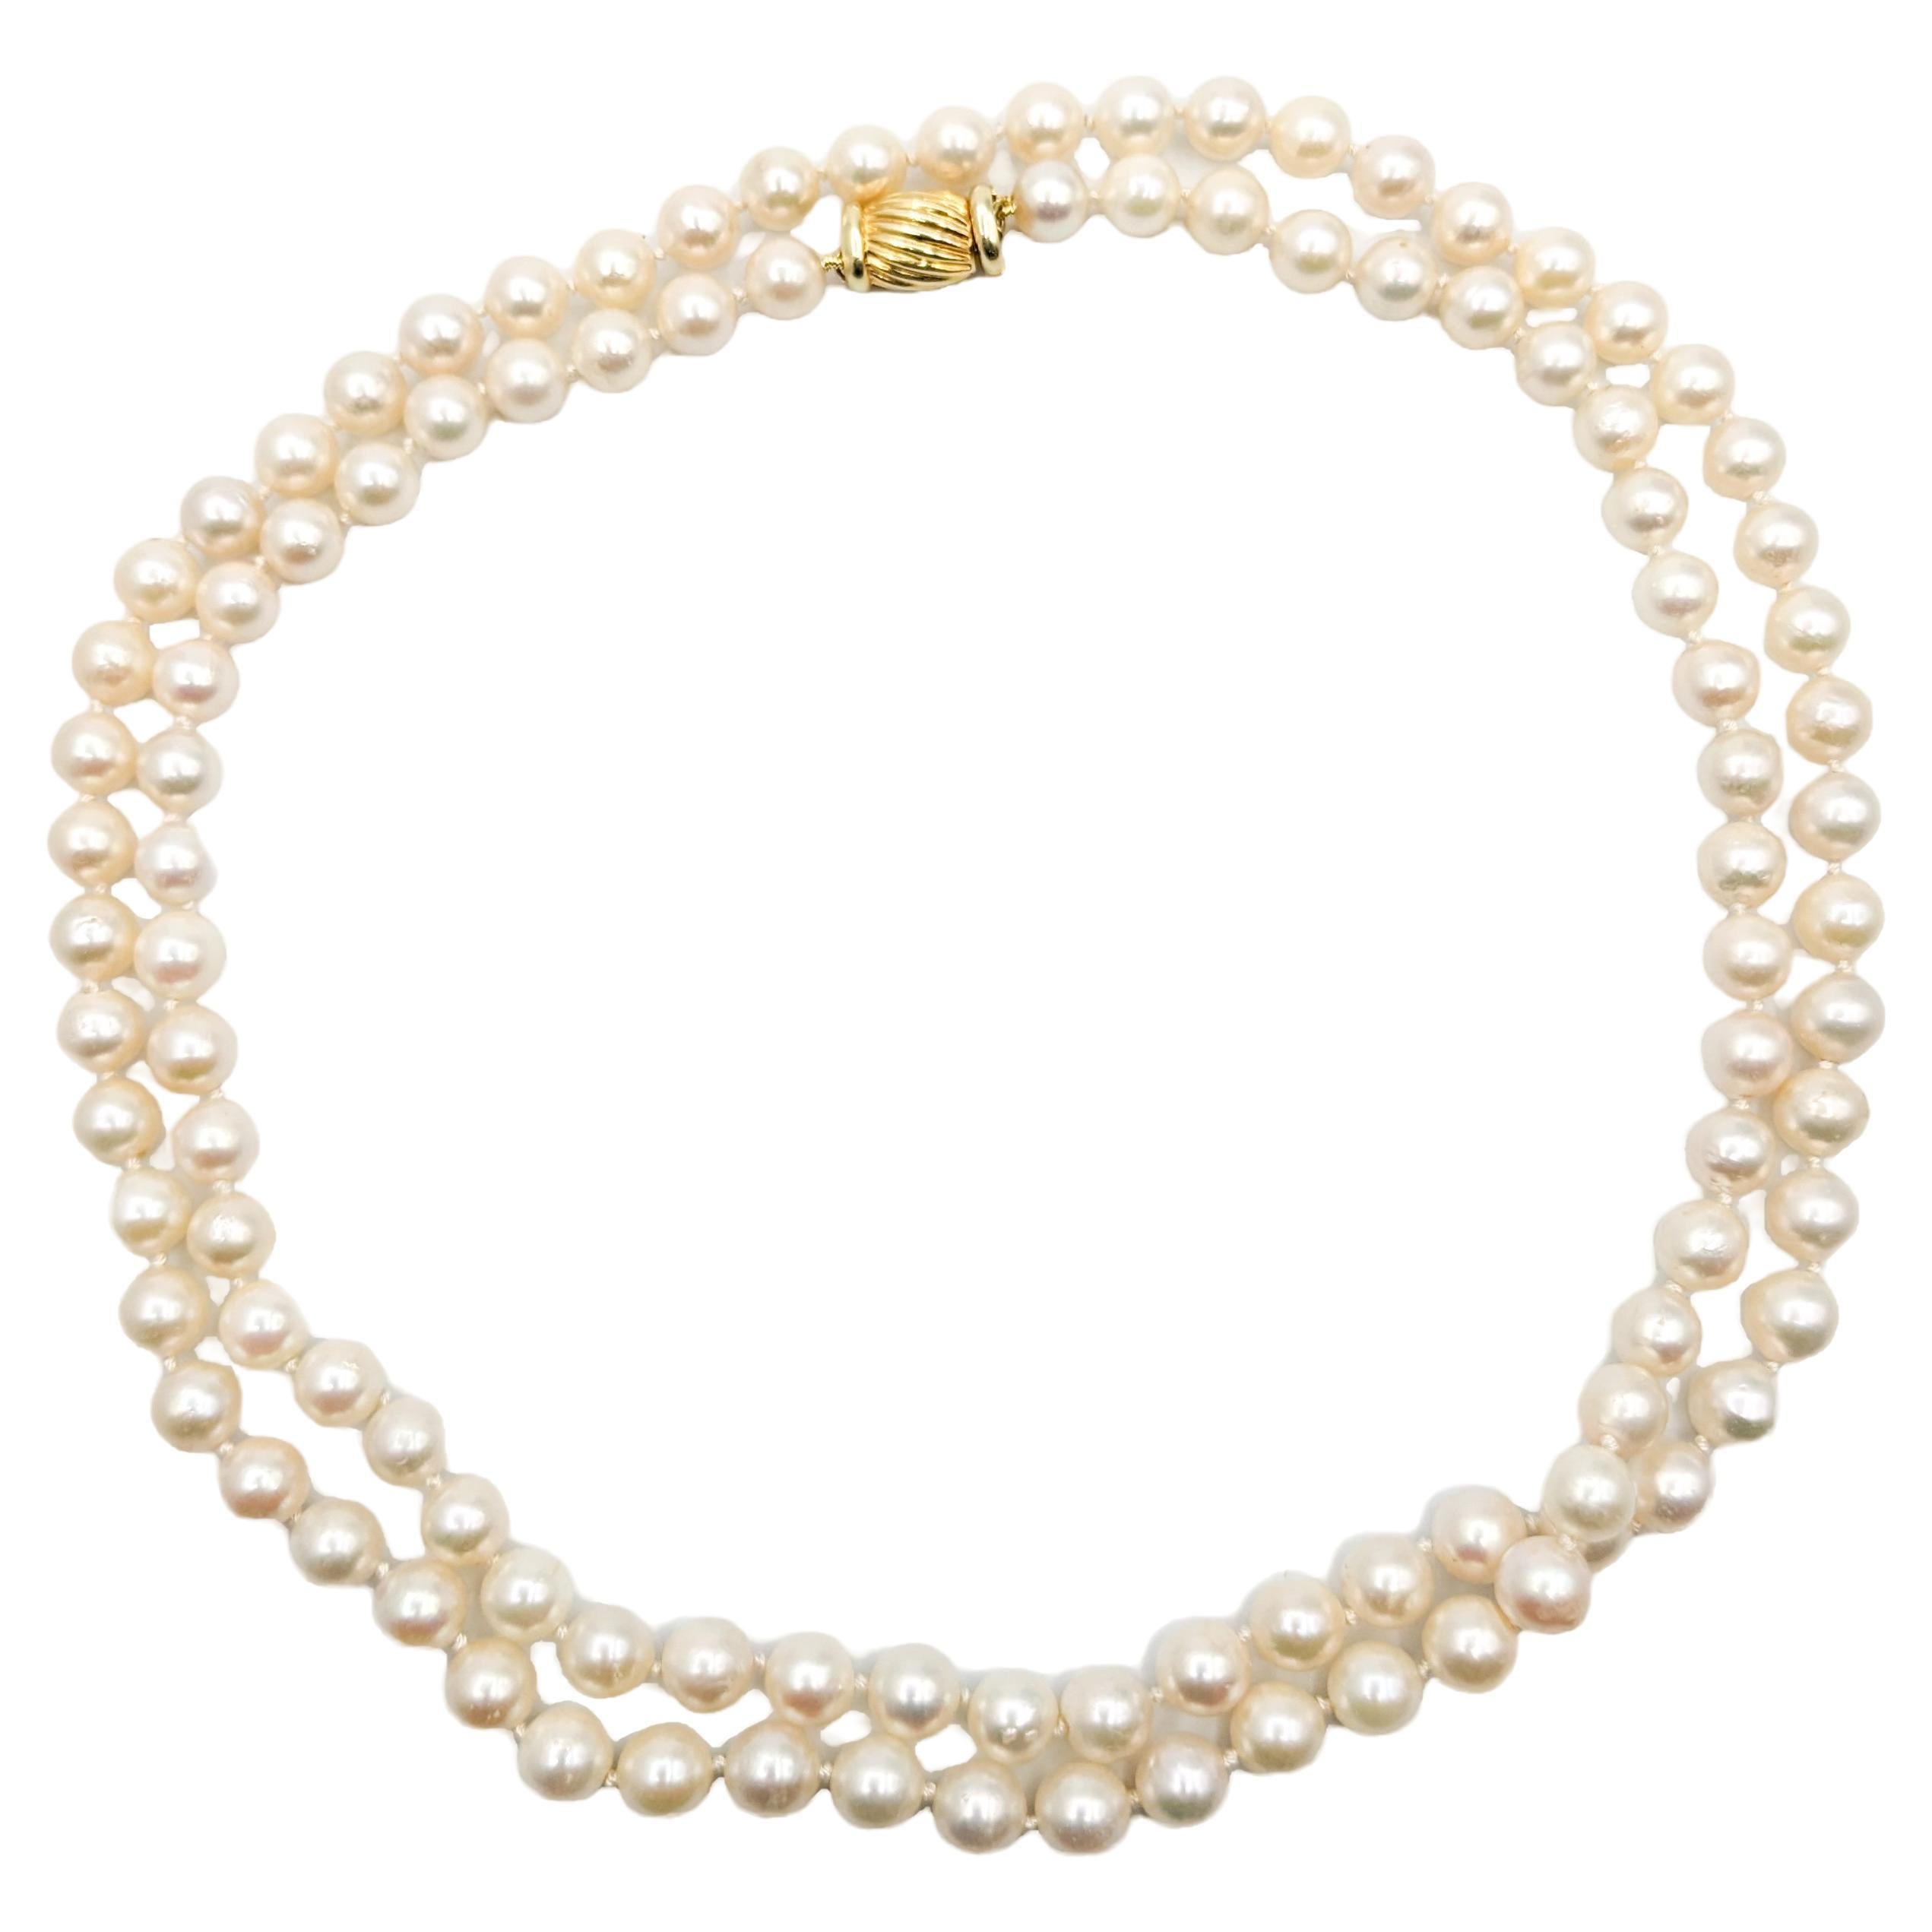 7.55mm Akoya Pearl 37 Inch Strand Necklace